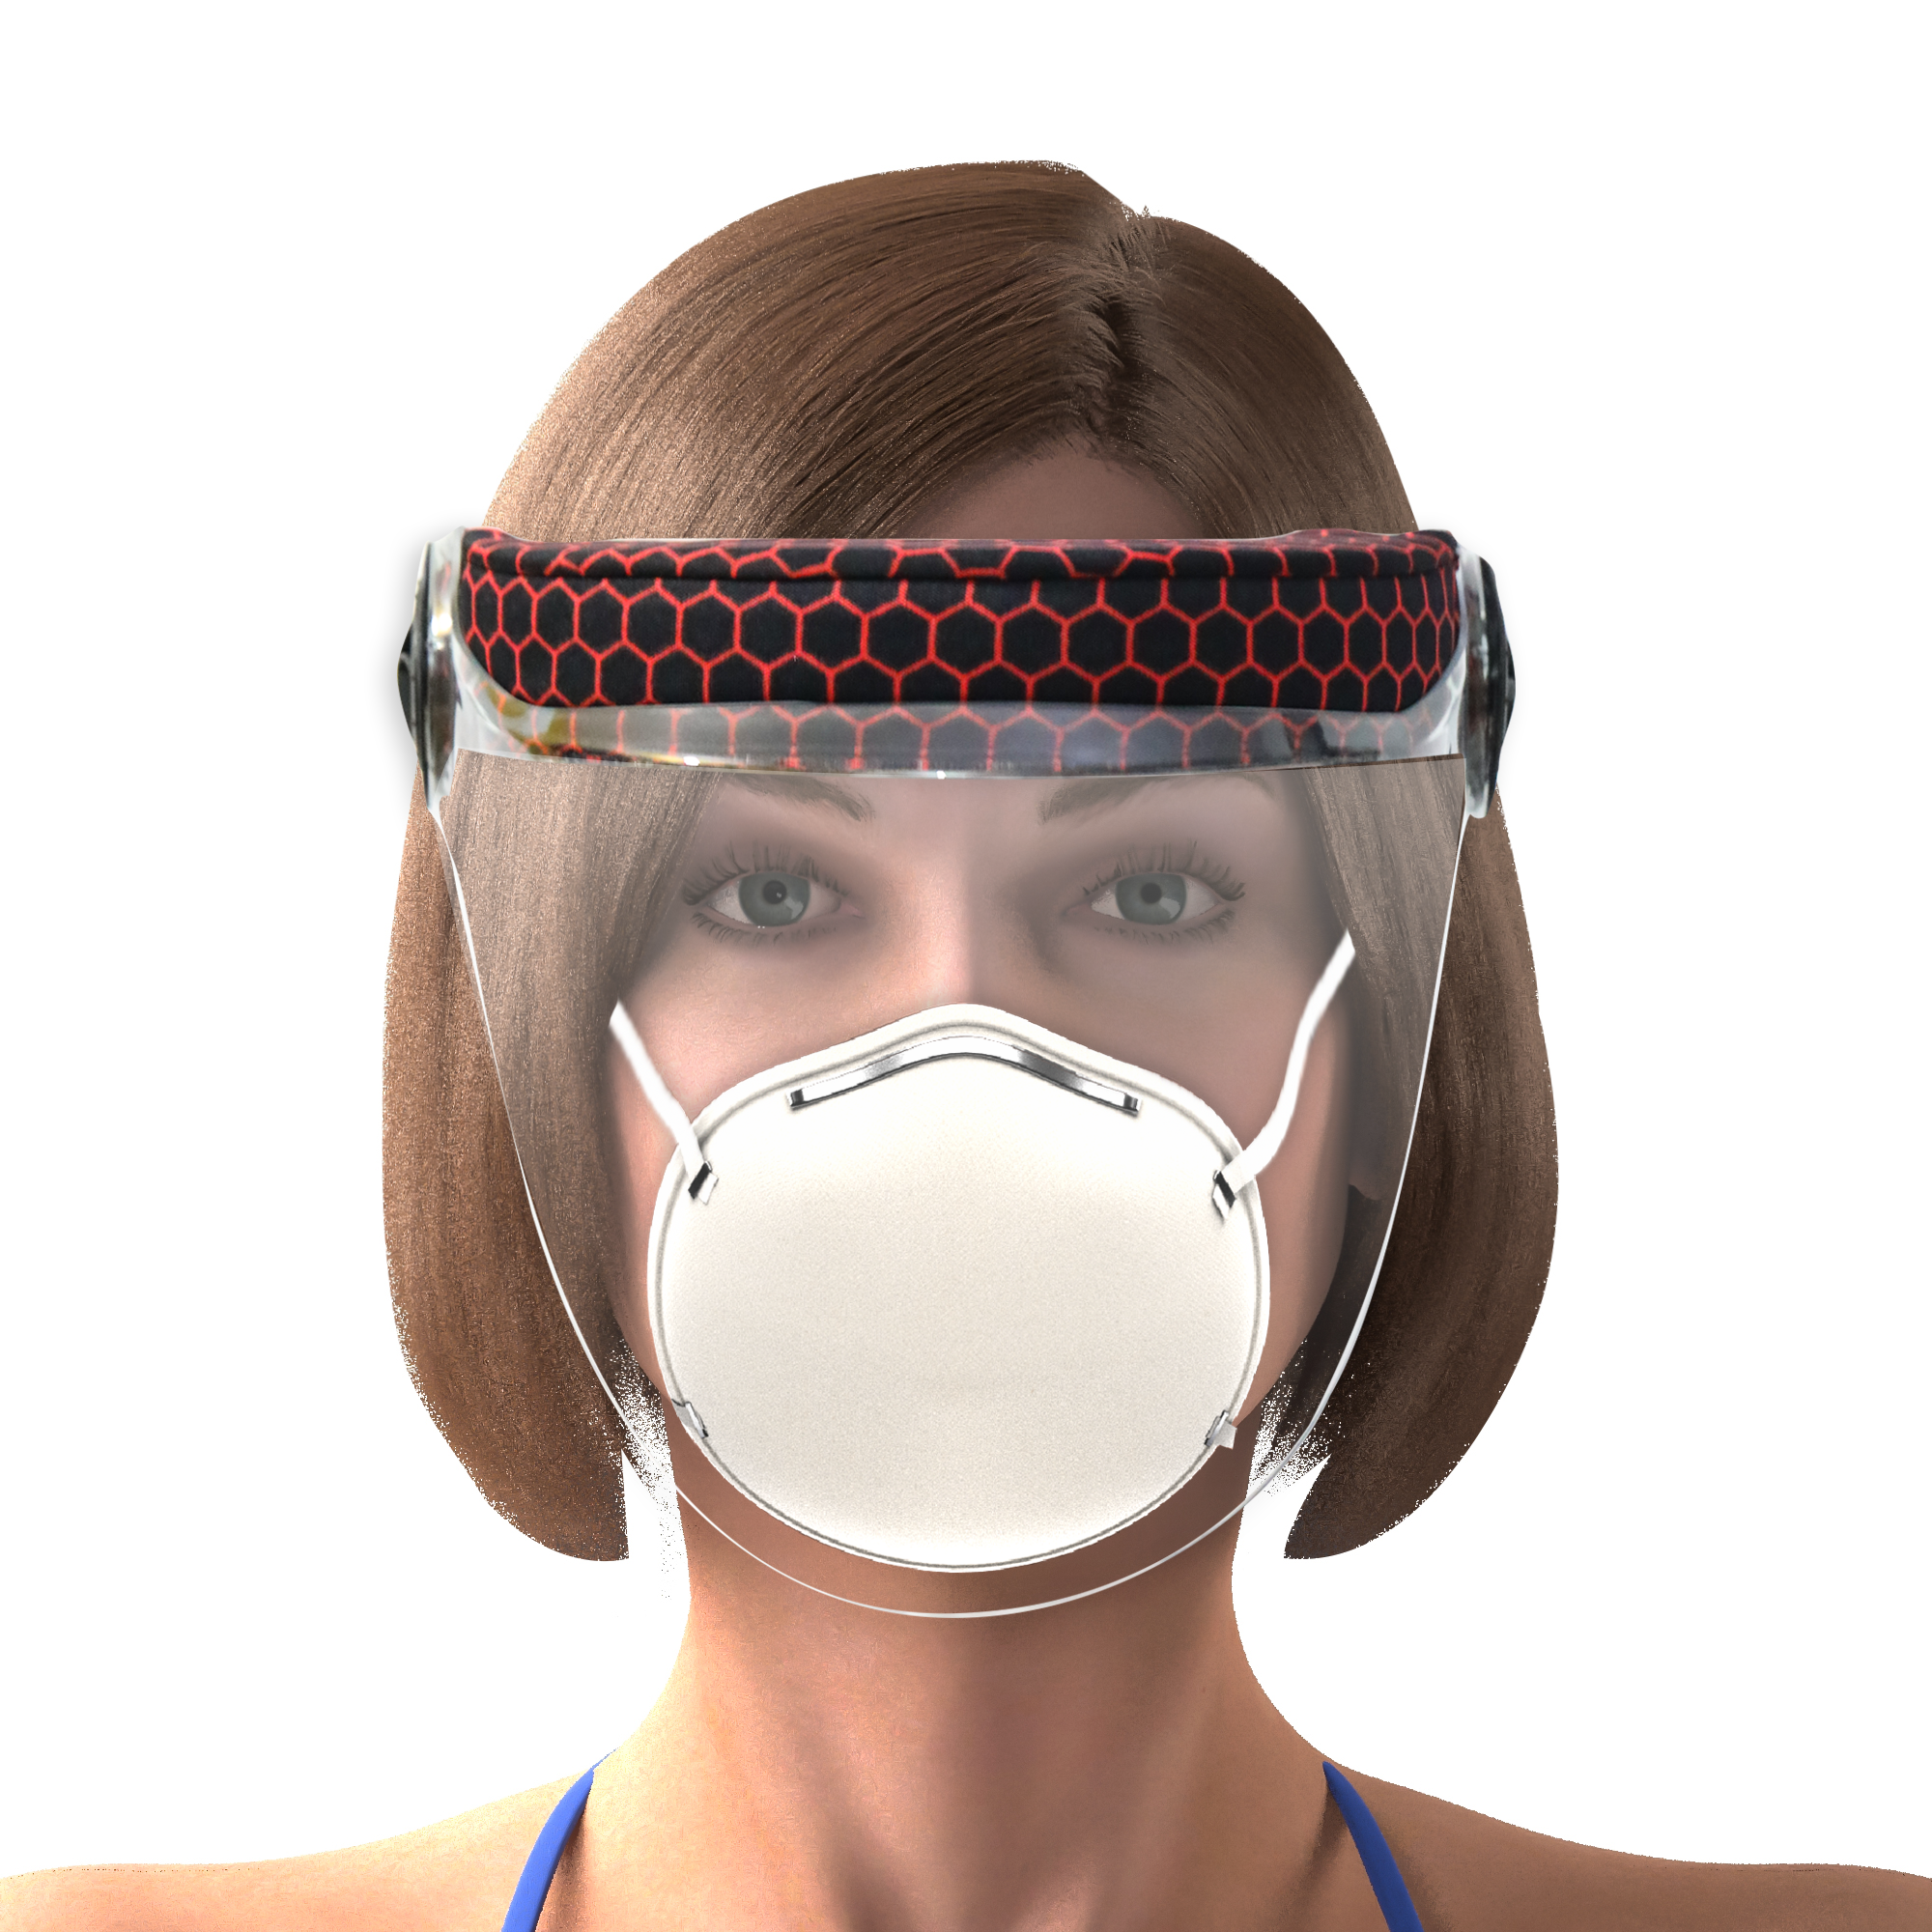 DESIGNER STATIC FACE SHIELD FOR WOMEN WITH RED HEXAGONAL INTERIOR